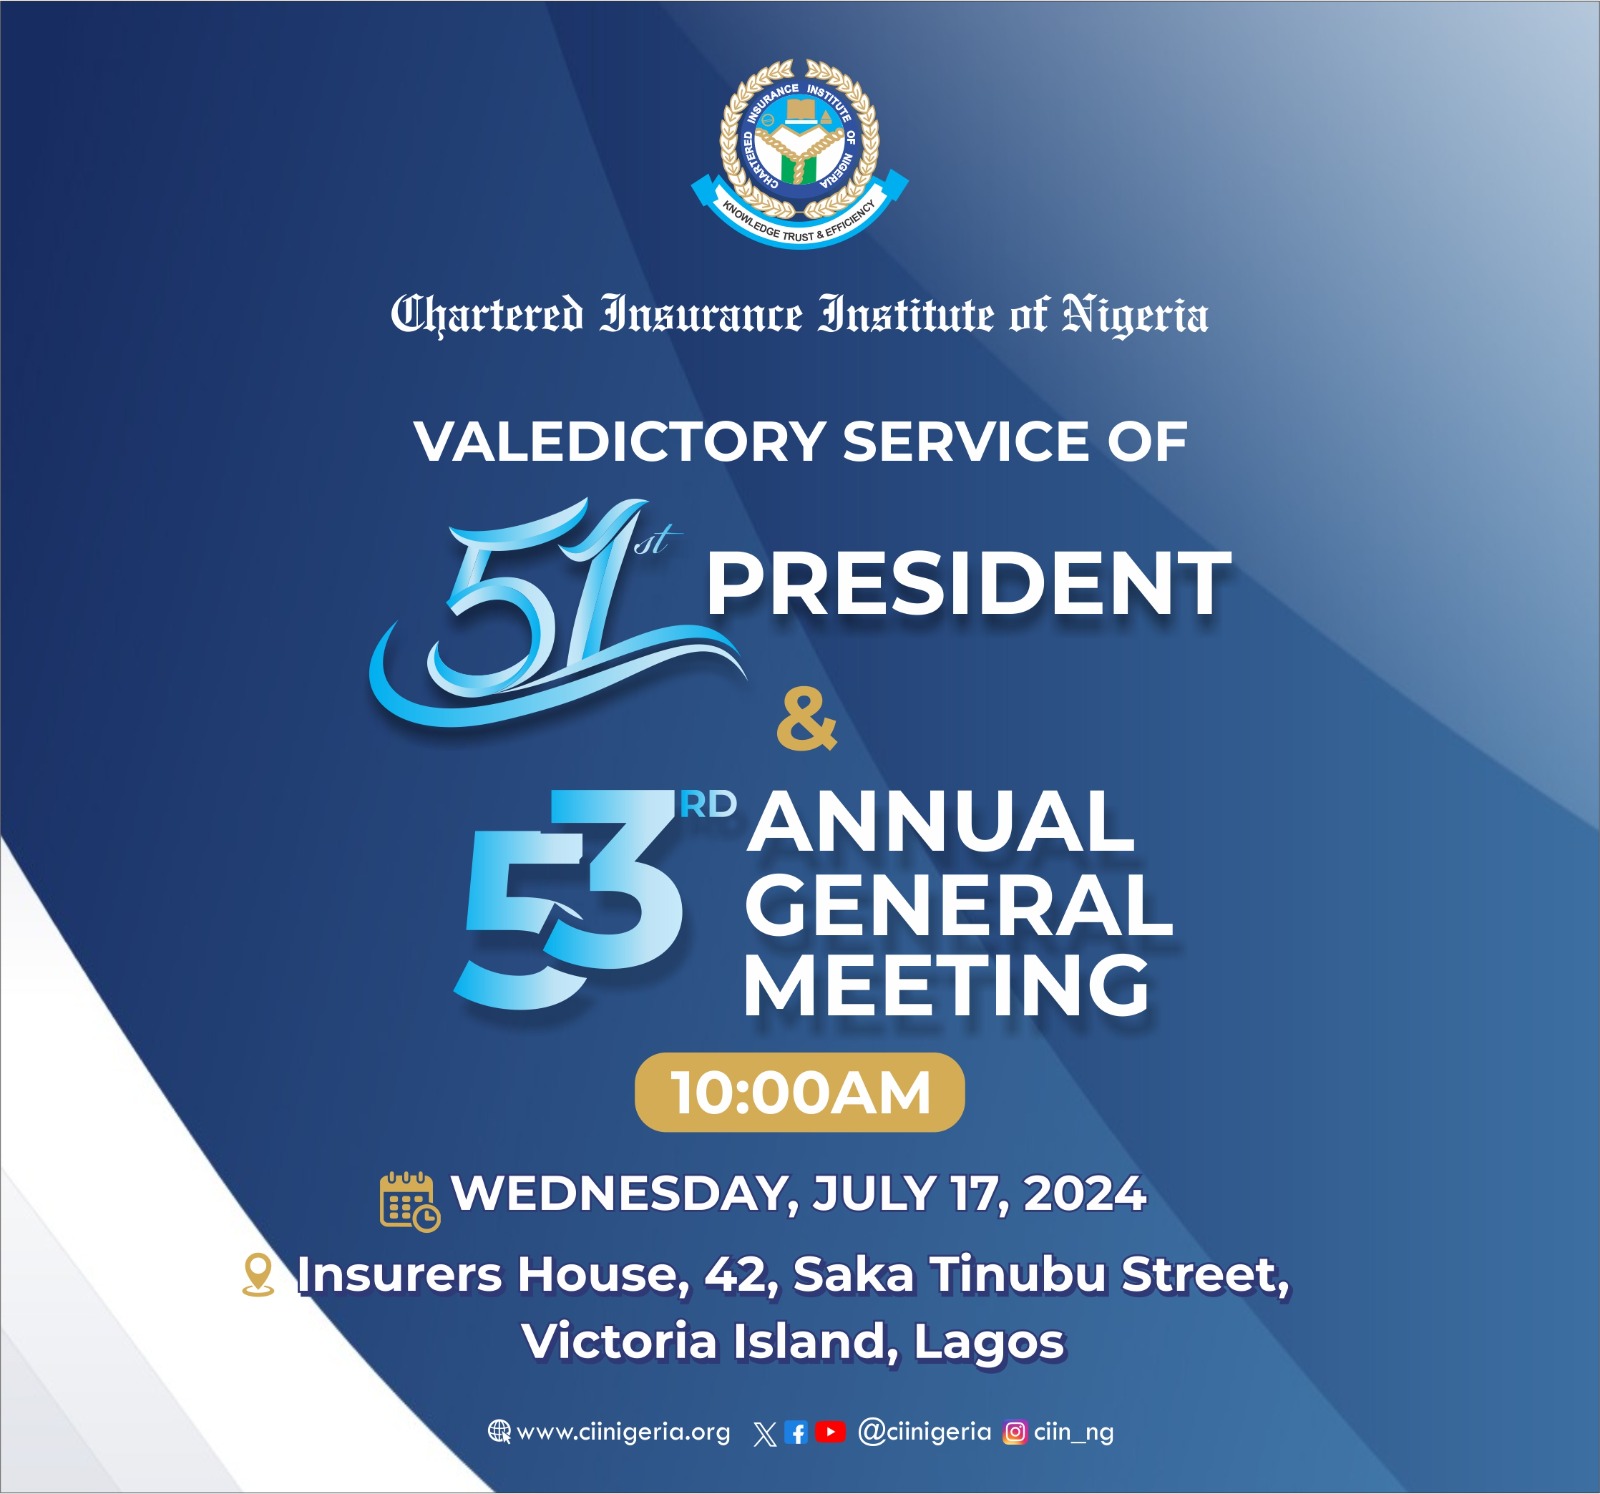 VALEDICTORY SERVICE OF THE 51ST PRESIDENT & 53RD ANNUAL GENERAL MEETING